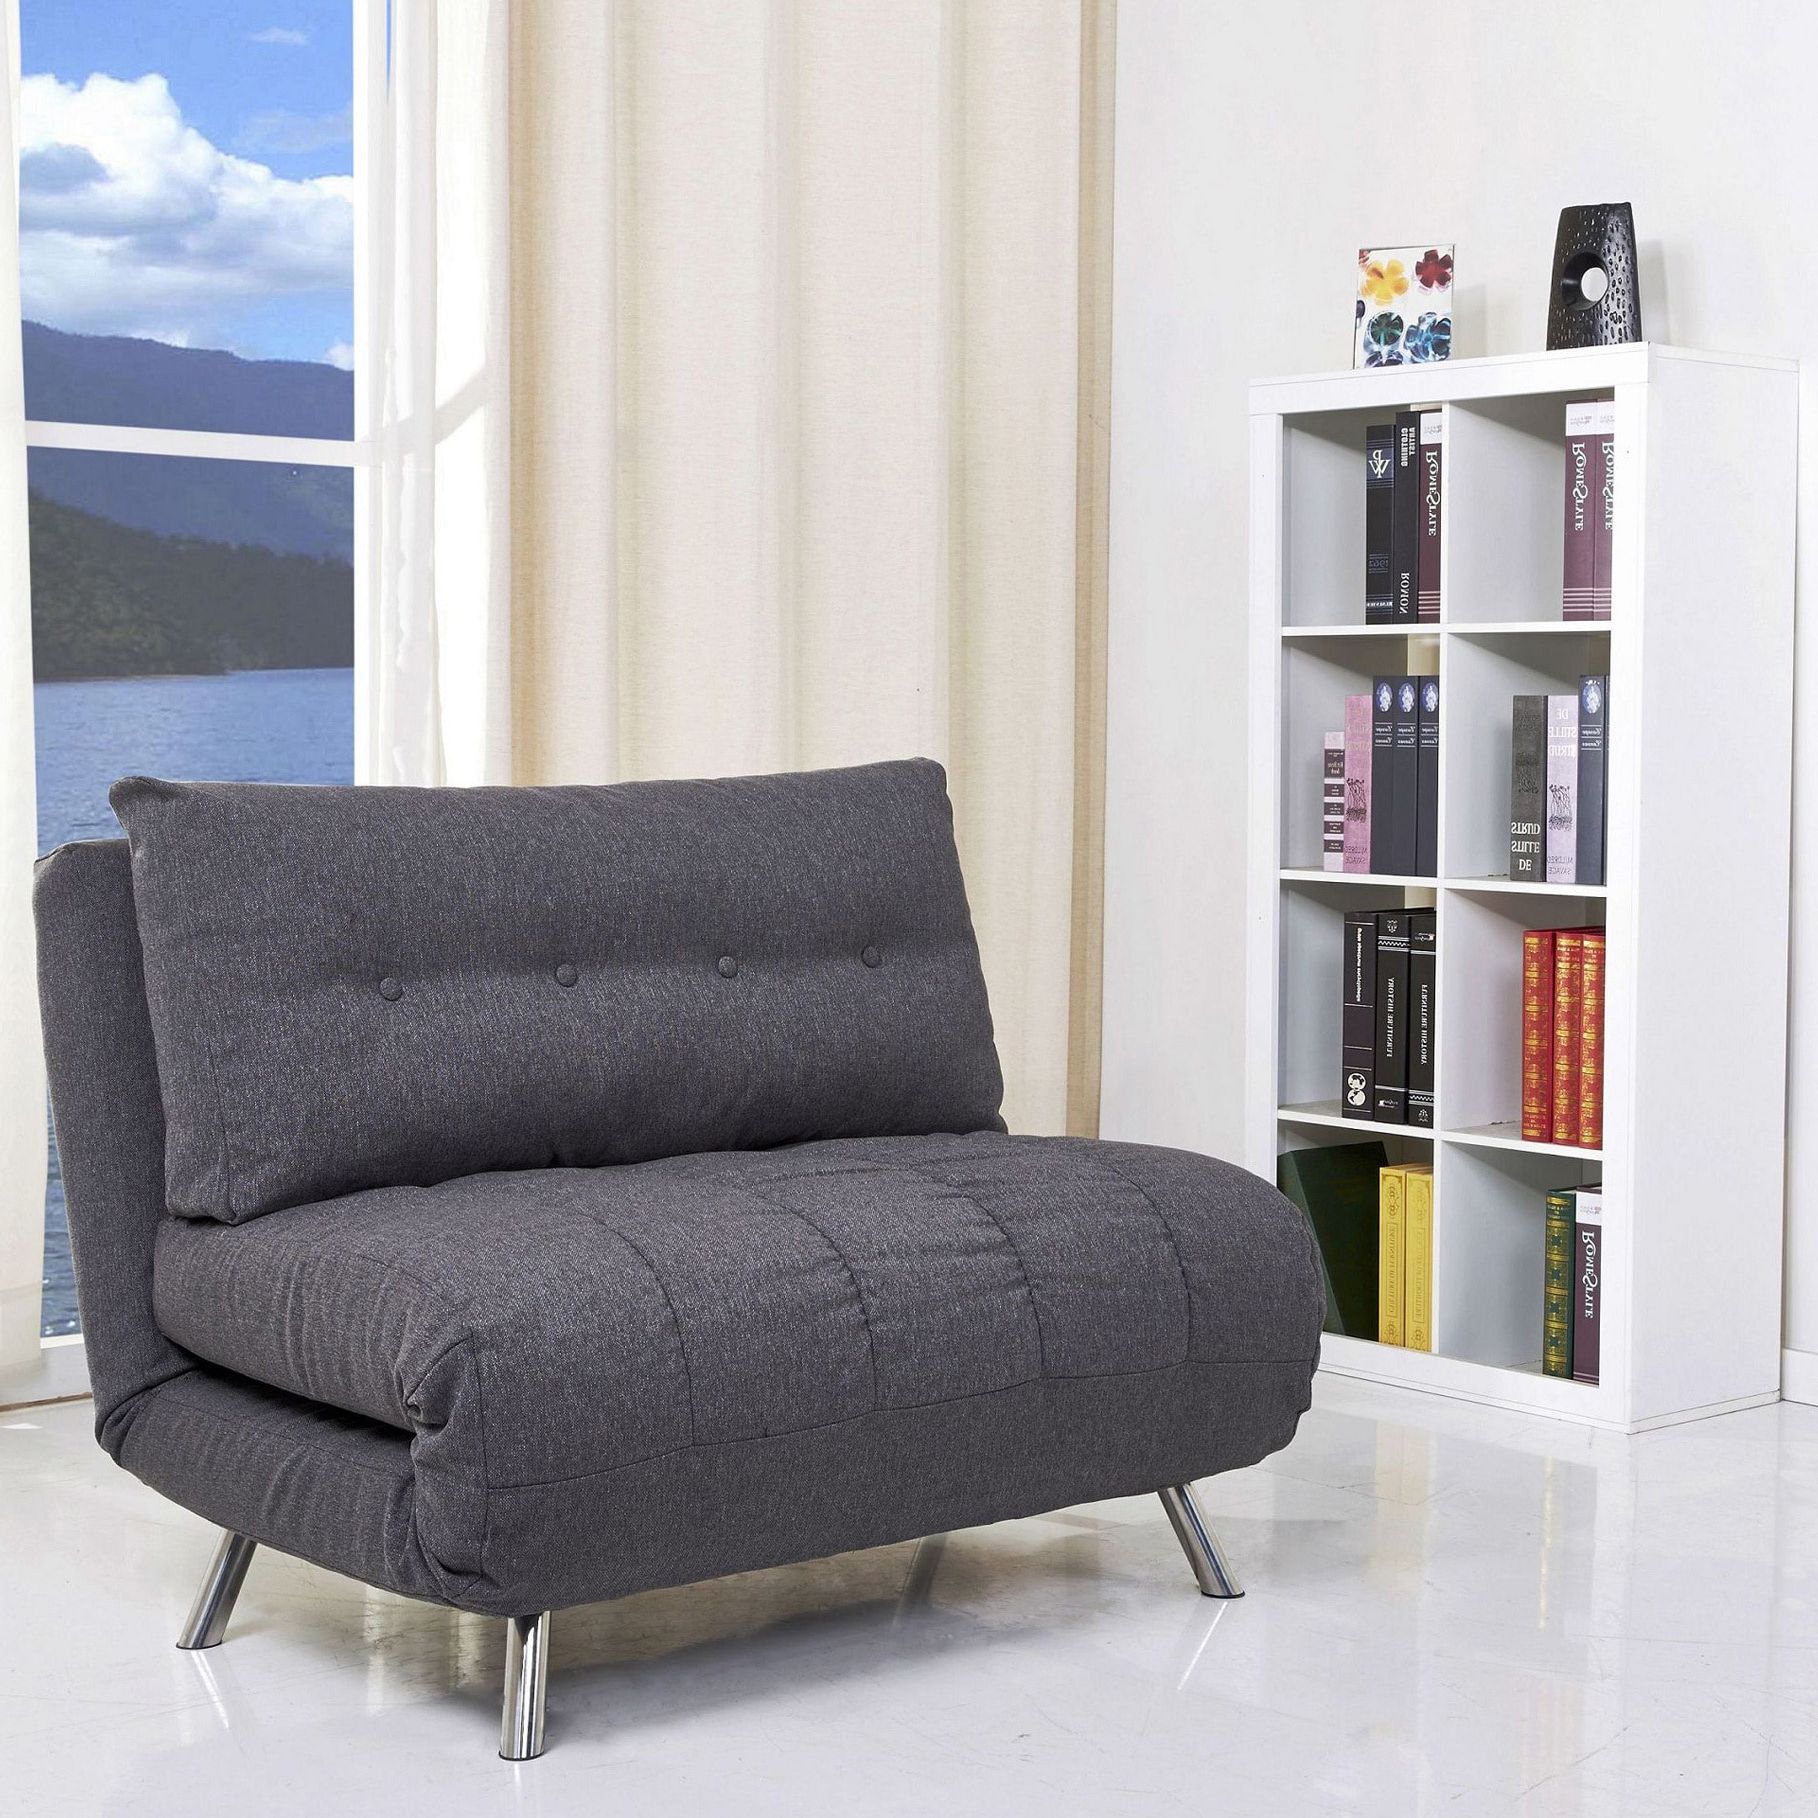 Shop Tampa Gray Convertible Large Chair/ Bed – Free Shipping Today Within Convertible Light Gray Chair Beds (View 9 of 20)